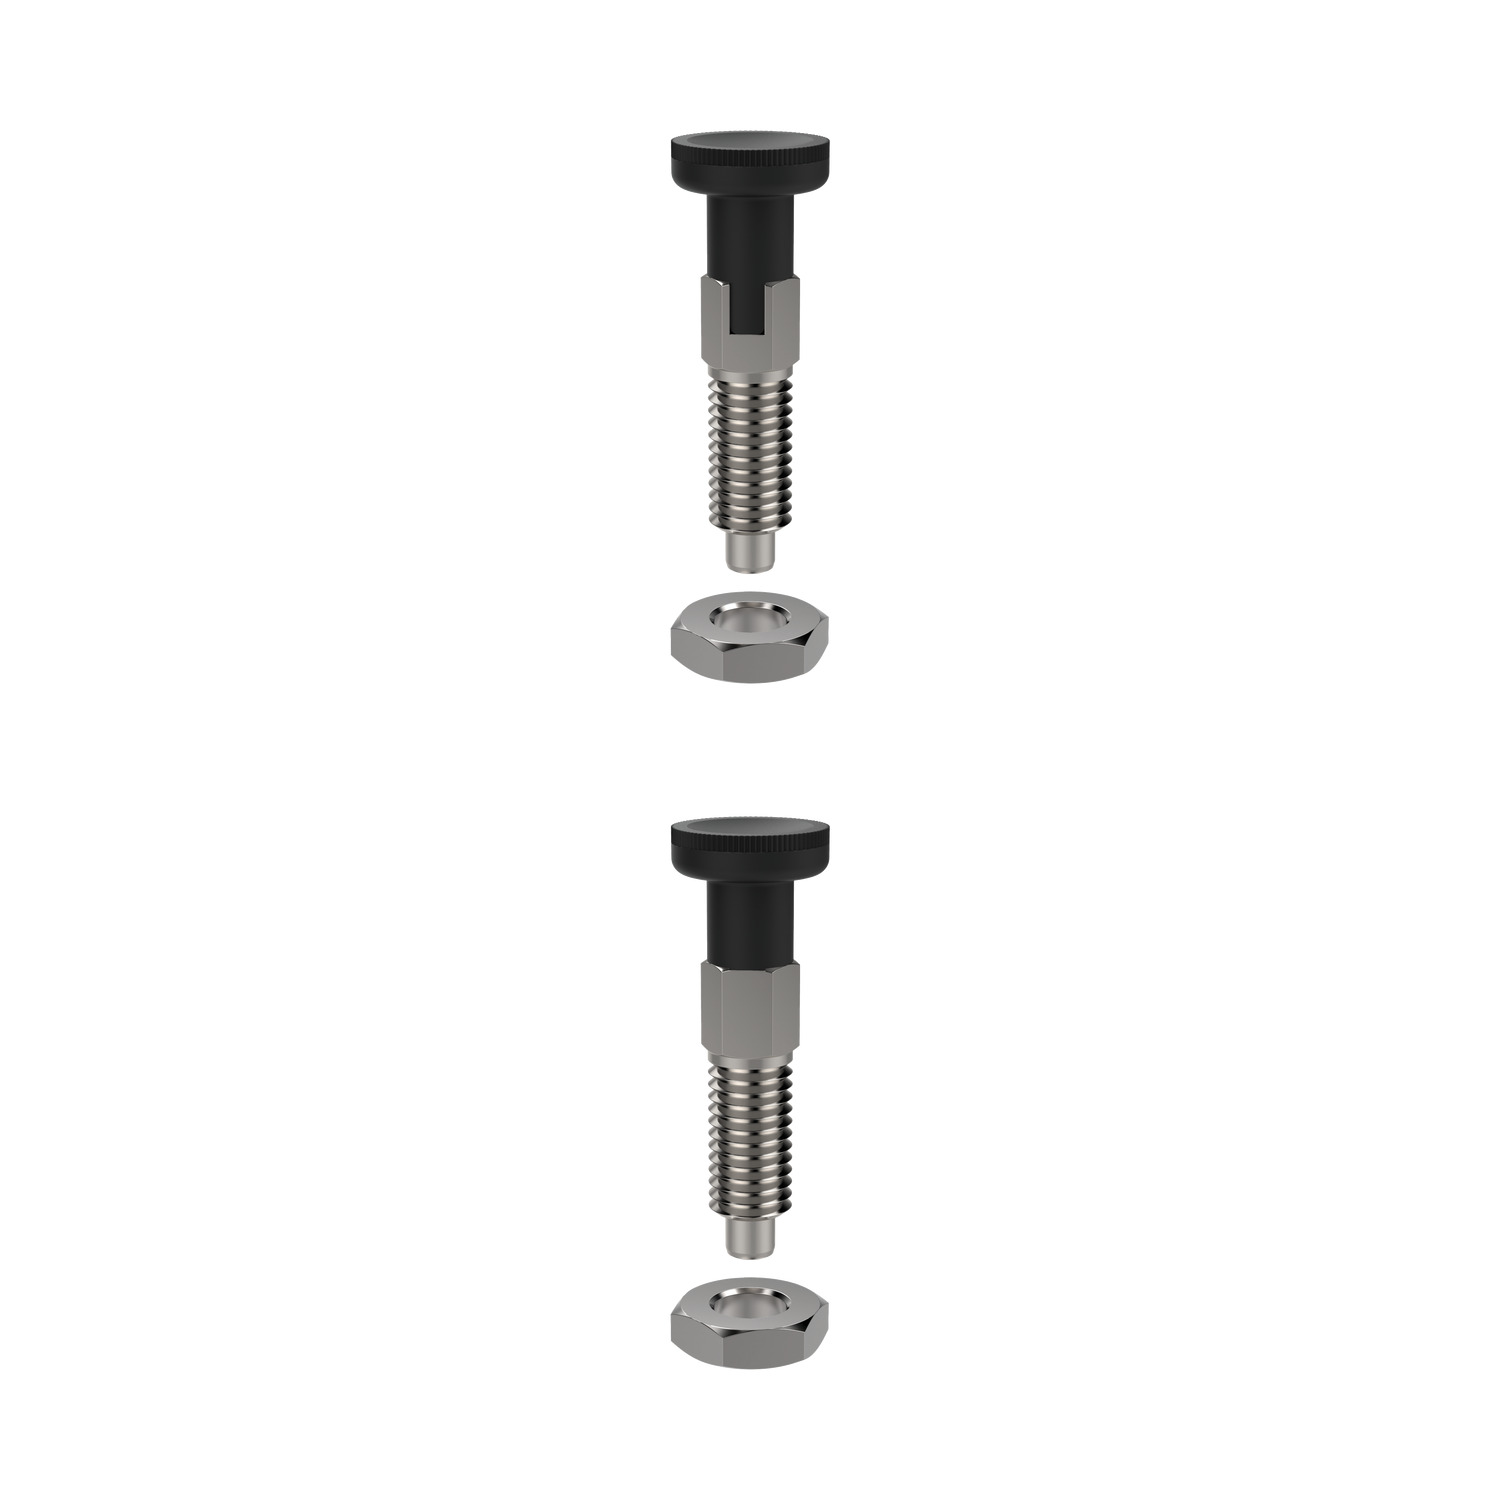 Index Plungers - Pull Grip Pull-grip Index Plungers with coarse thread. Available in locking and non-locking type.